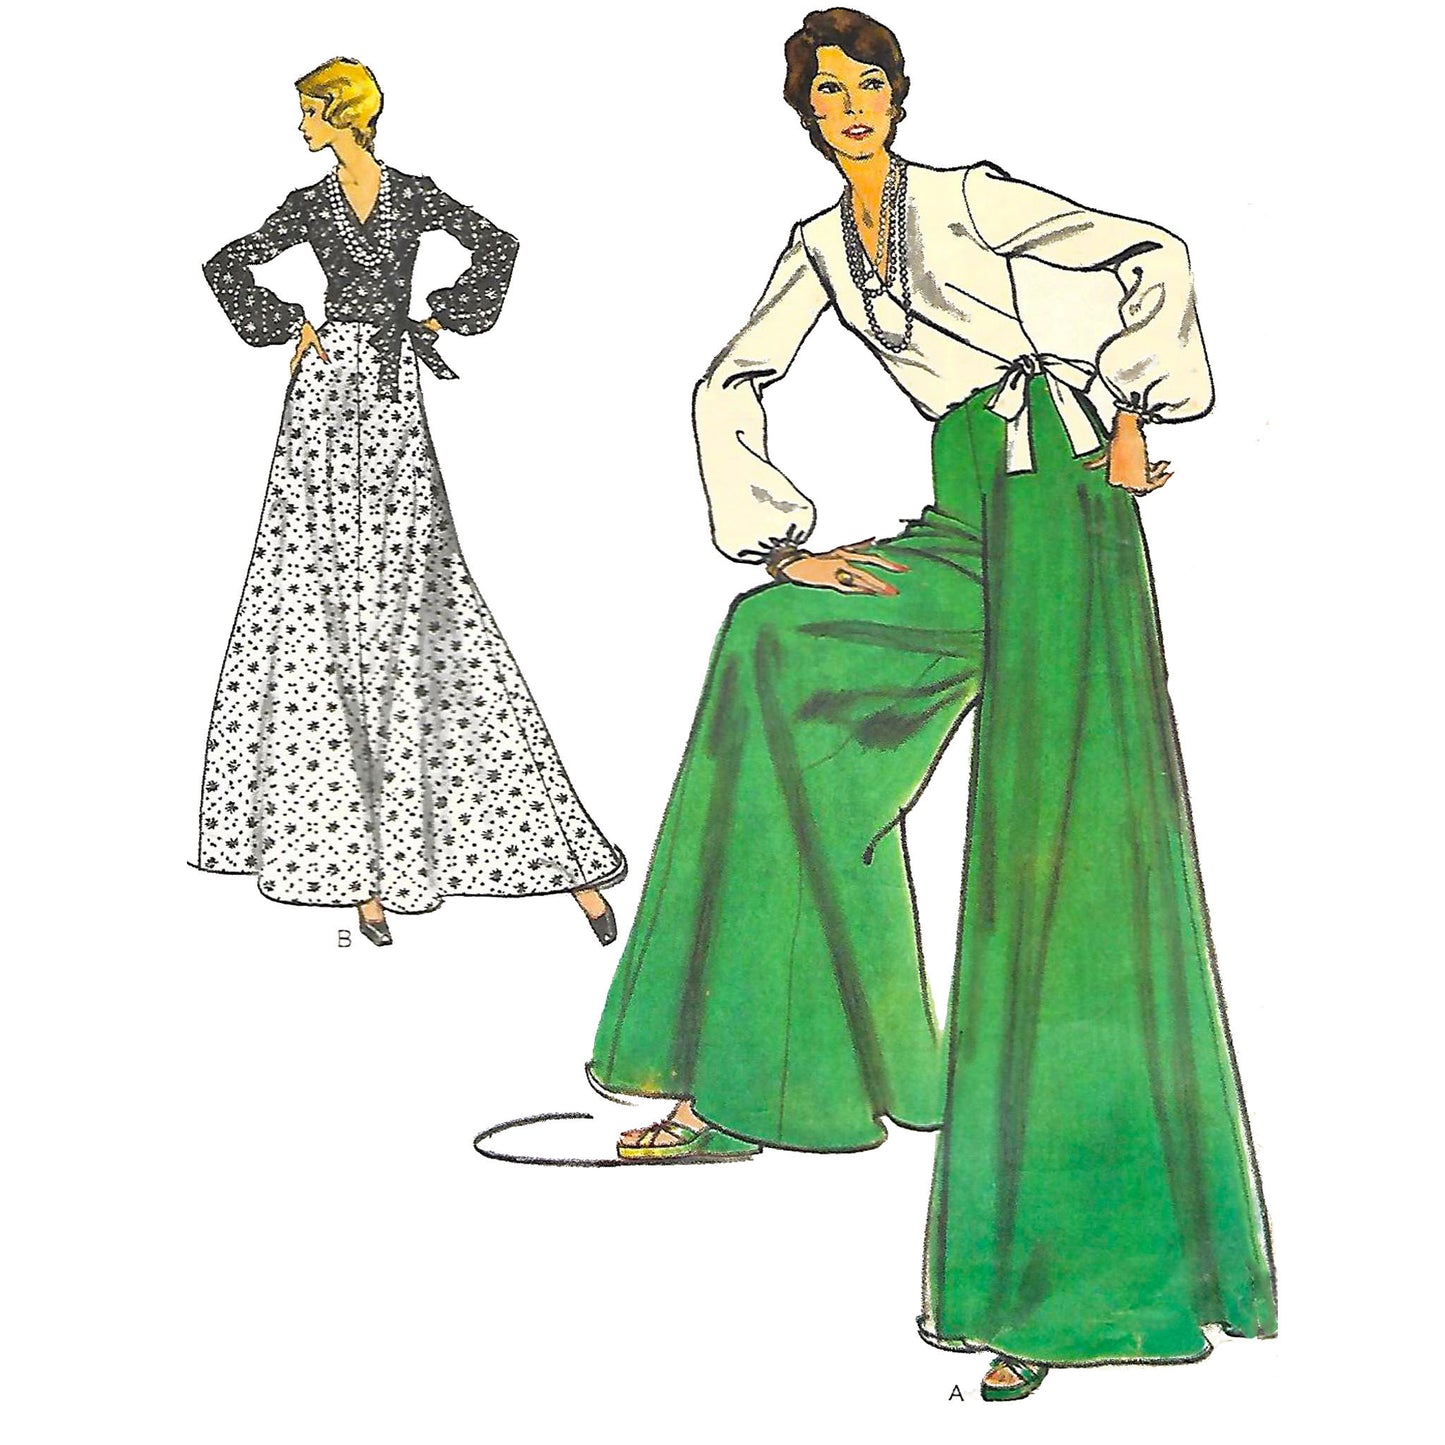 Women in wide fitting pants, pantskirt, wrap top and skirt.